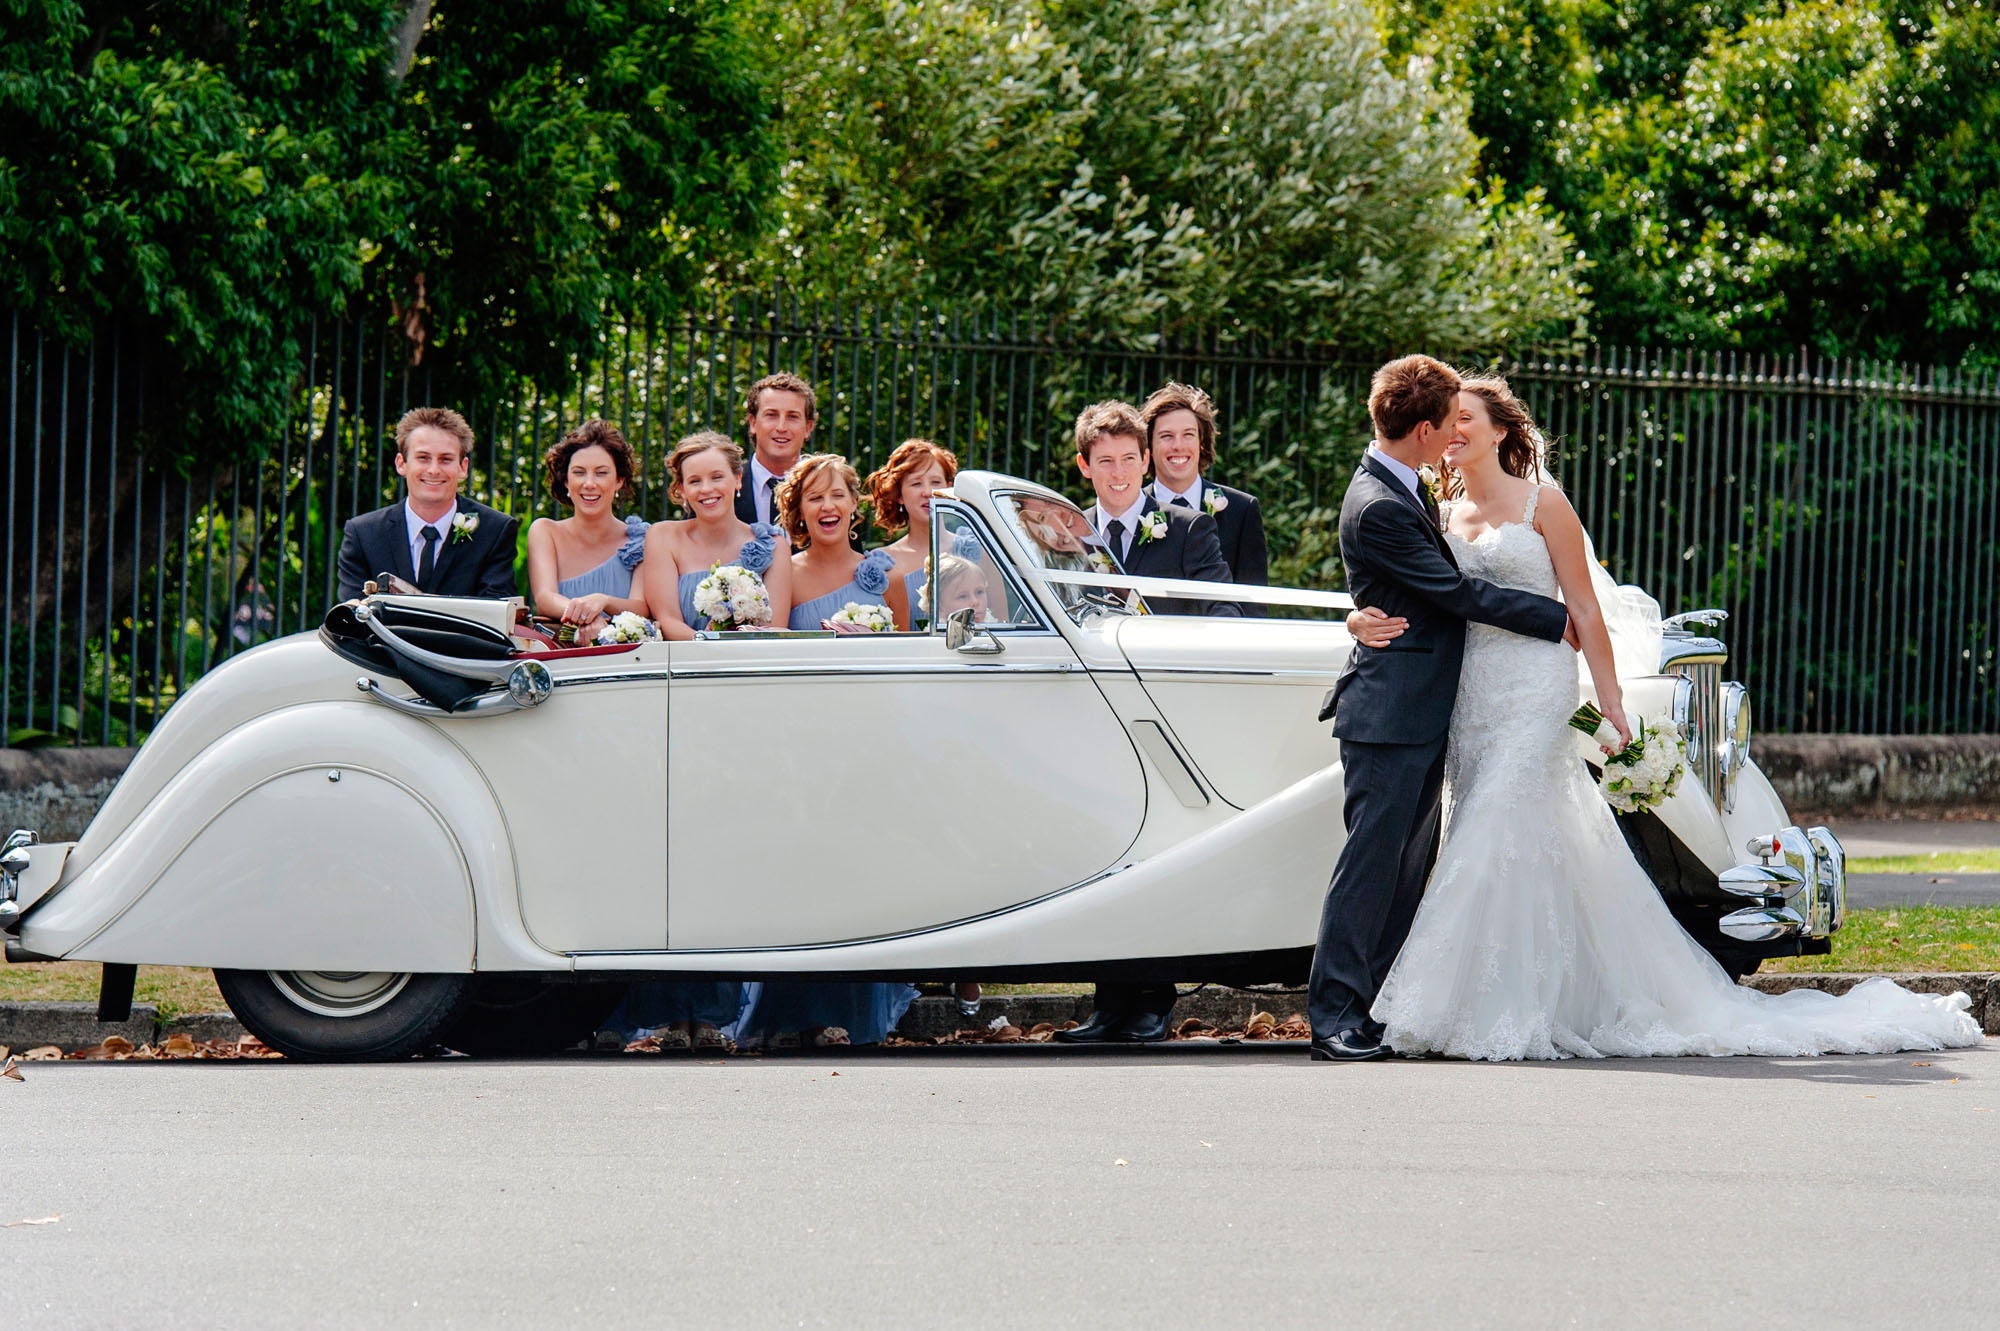 Bridal party with wedding cars